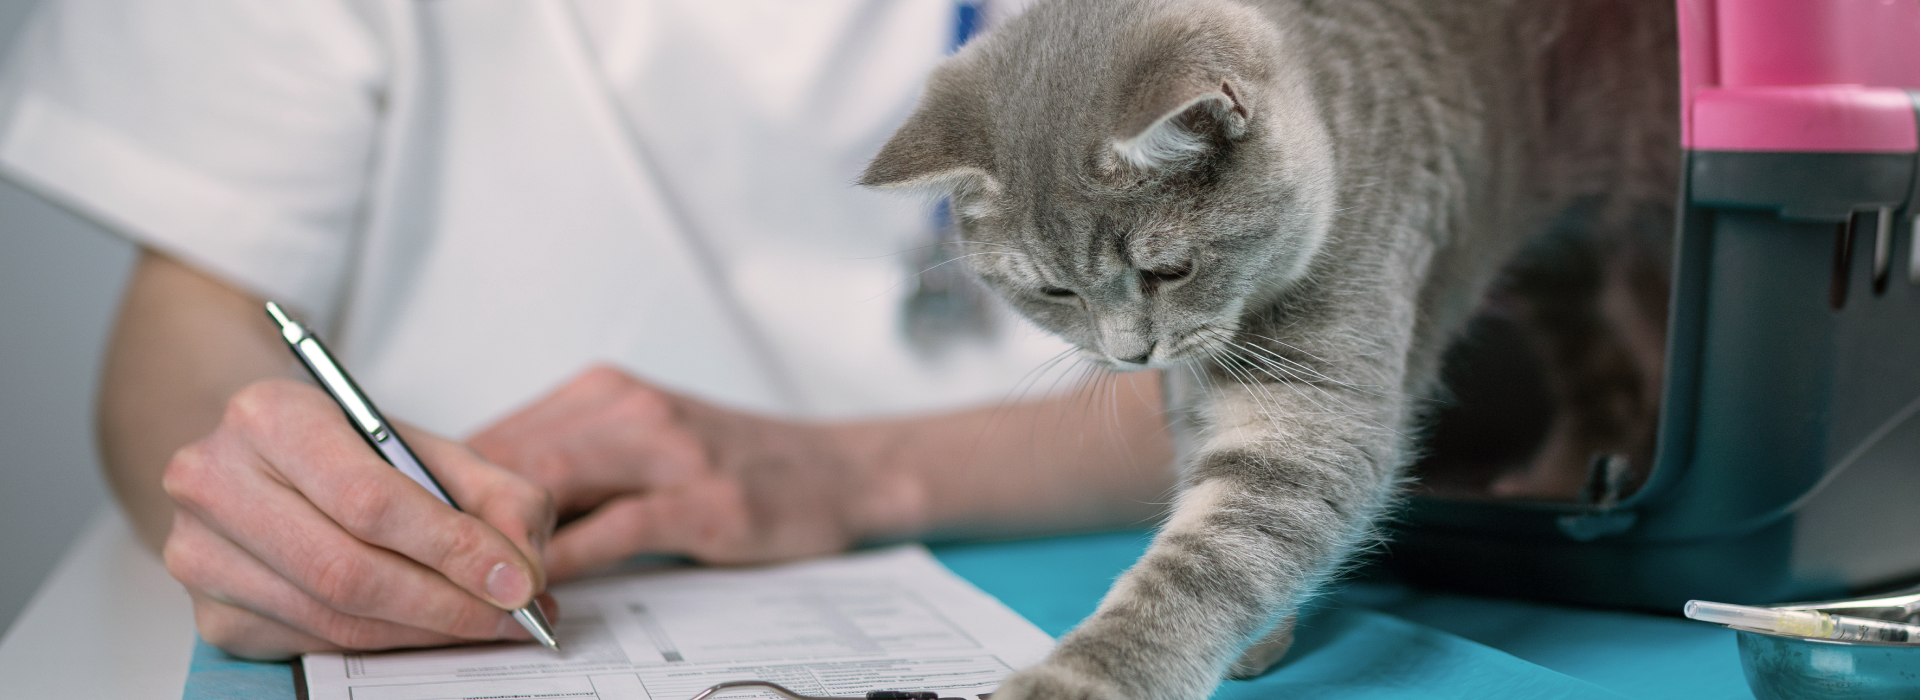 Vet check up with pet cat